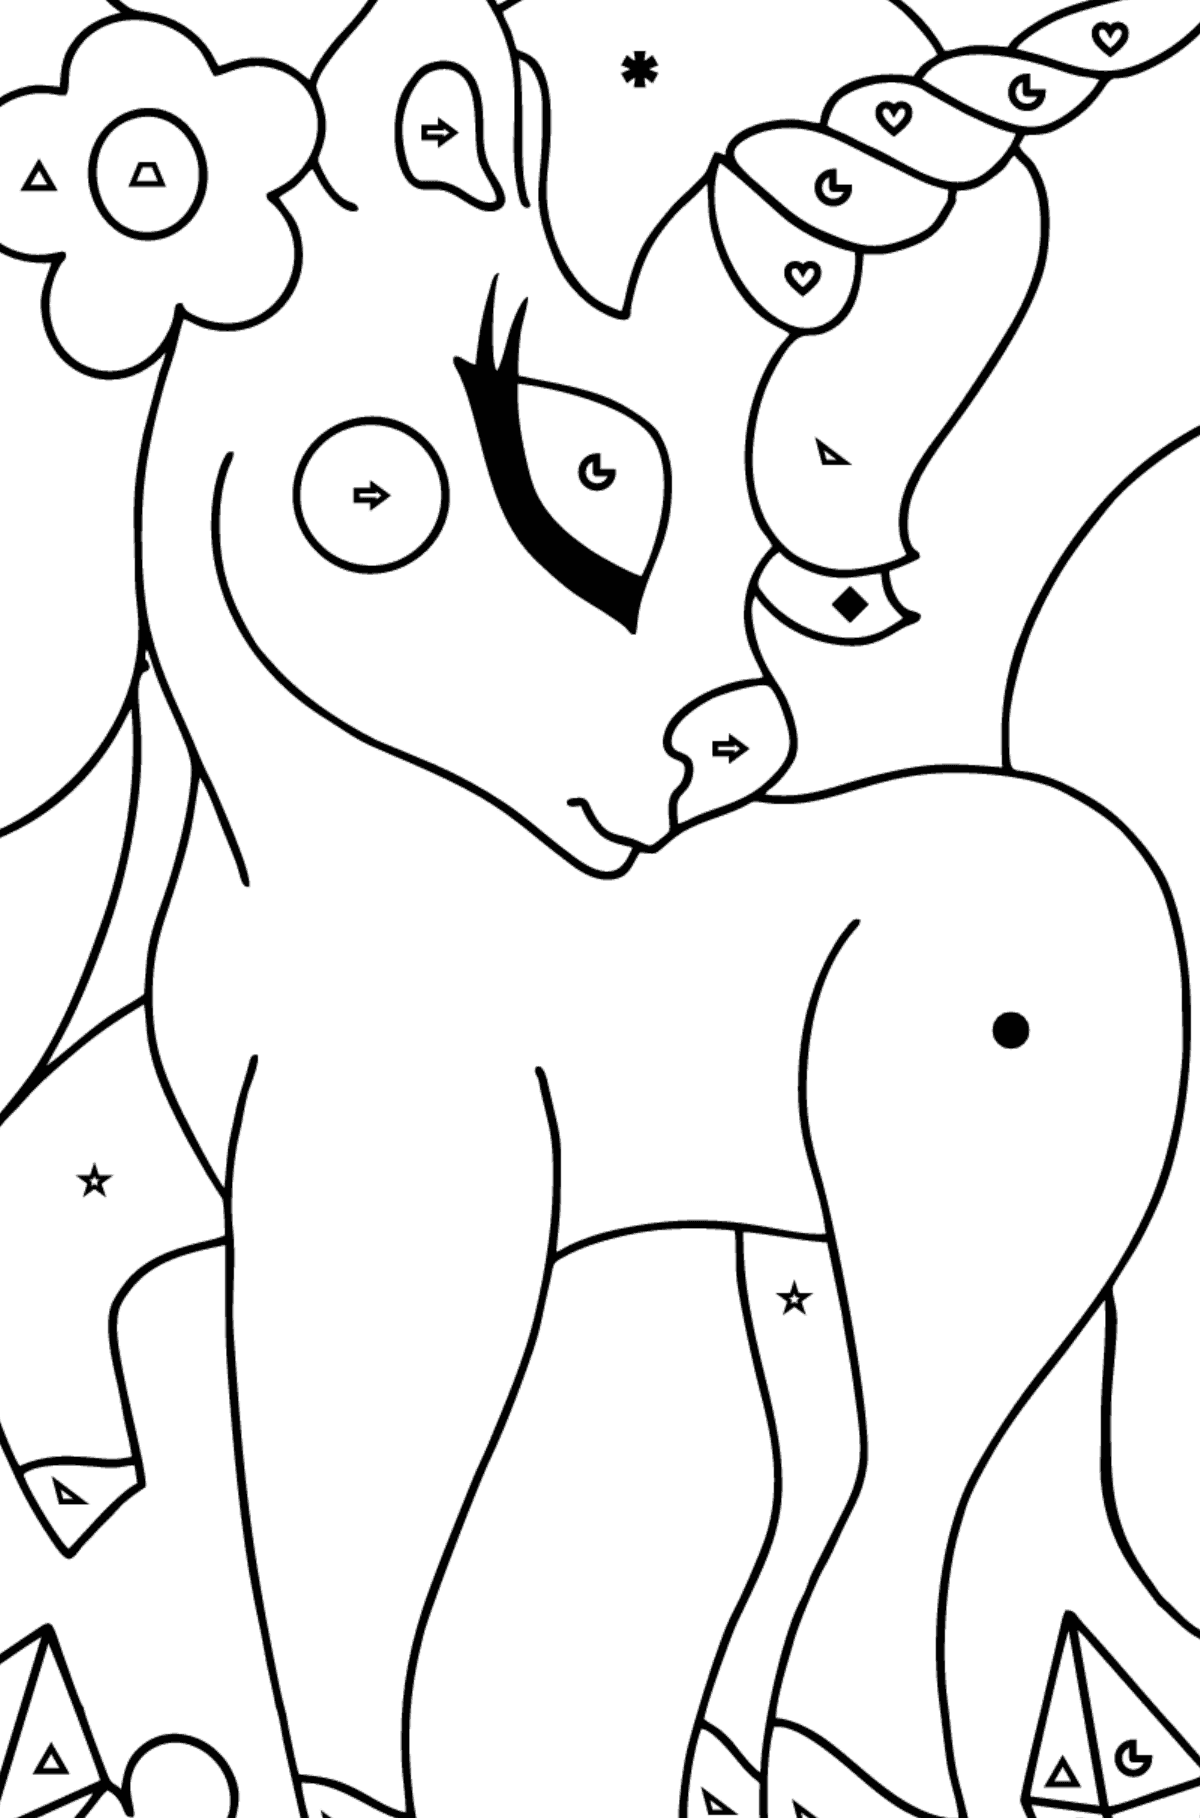 Charming Unicorn Coloring Page - Coloring by Symbols and Geometric Shapes for Kids